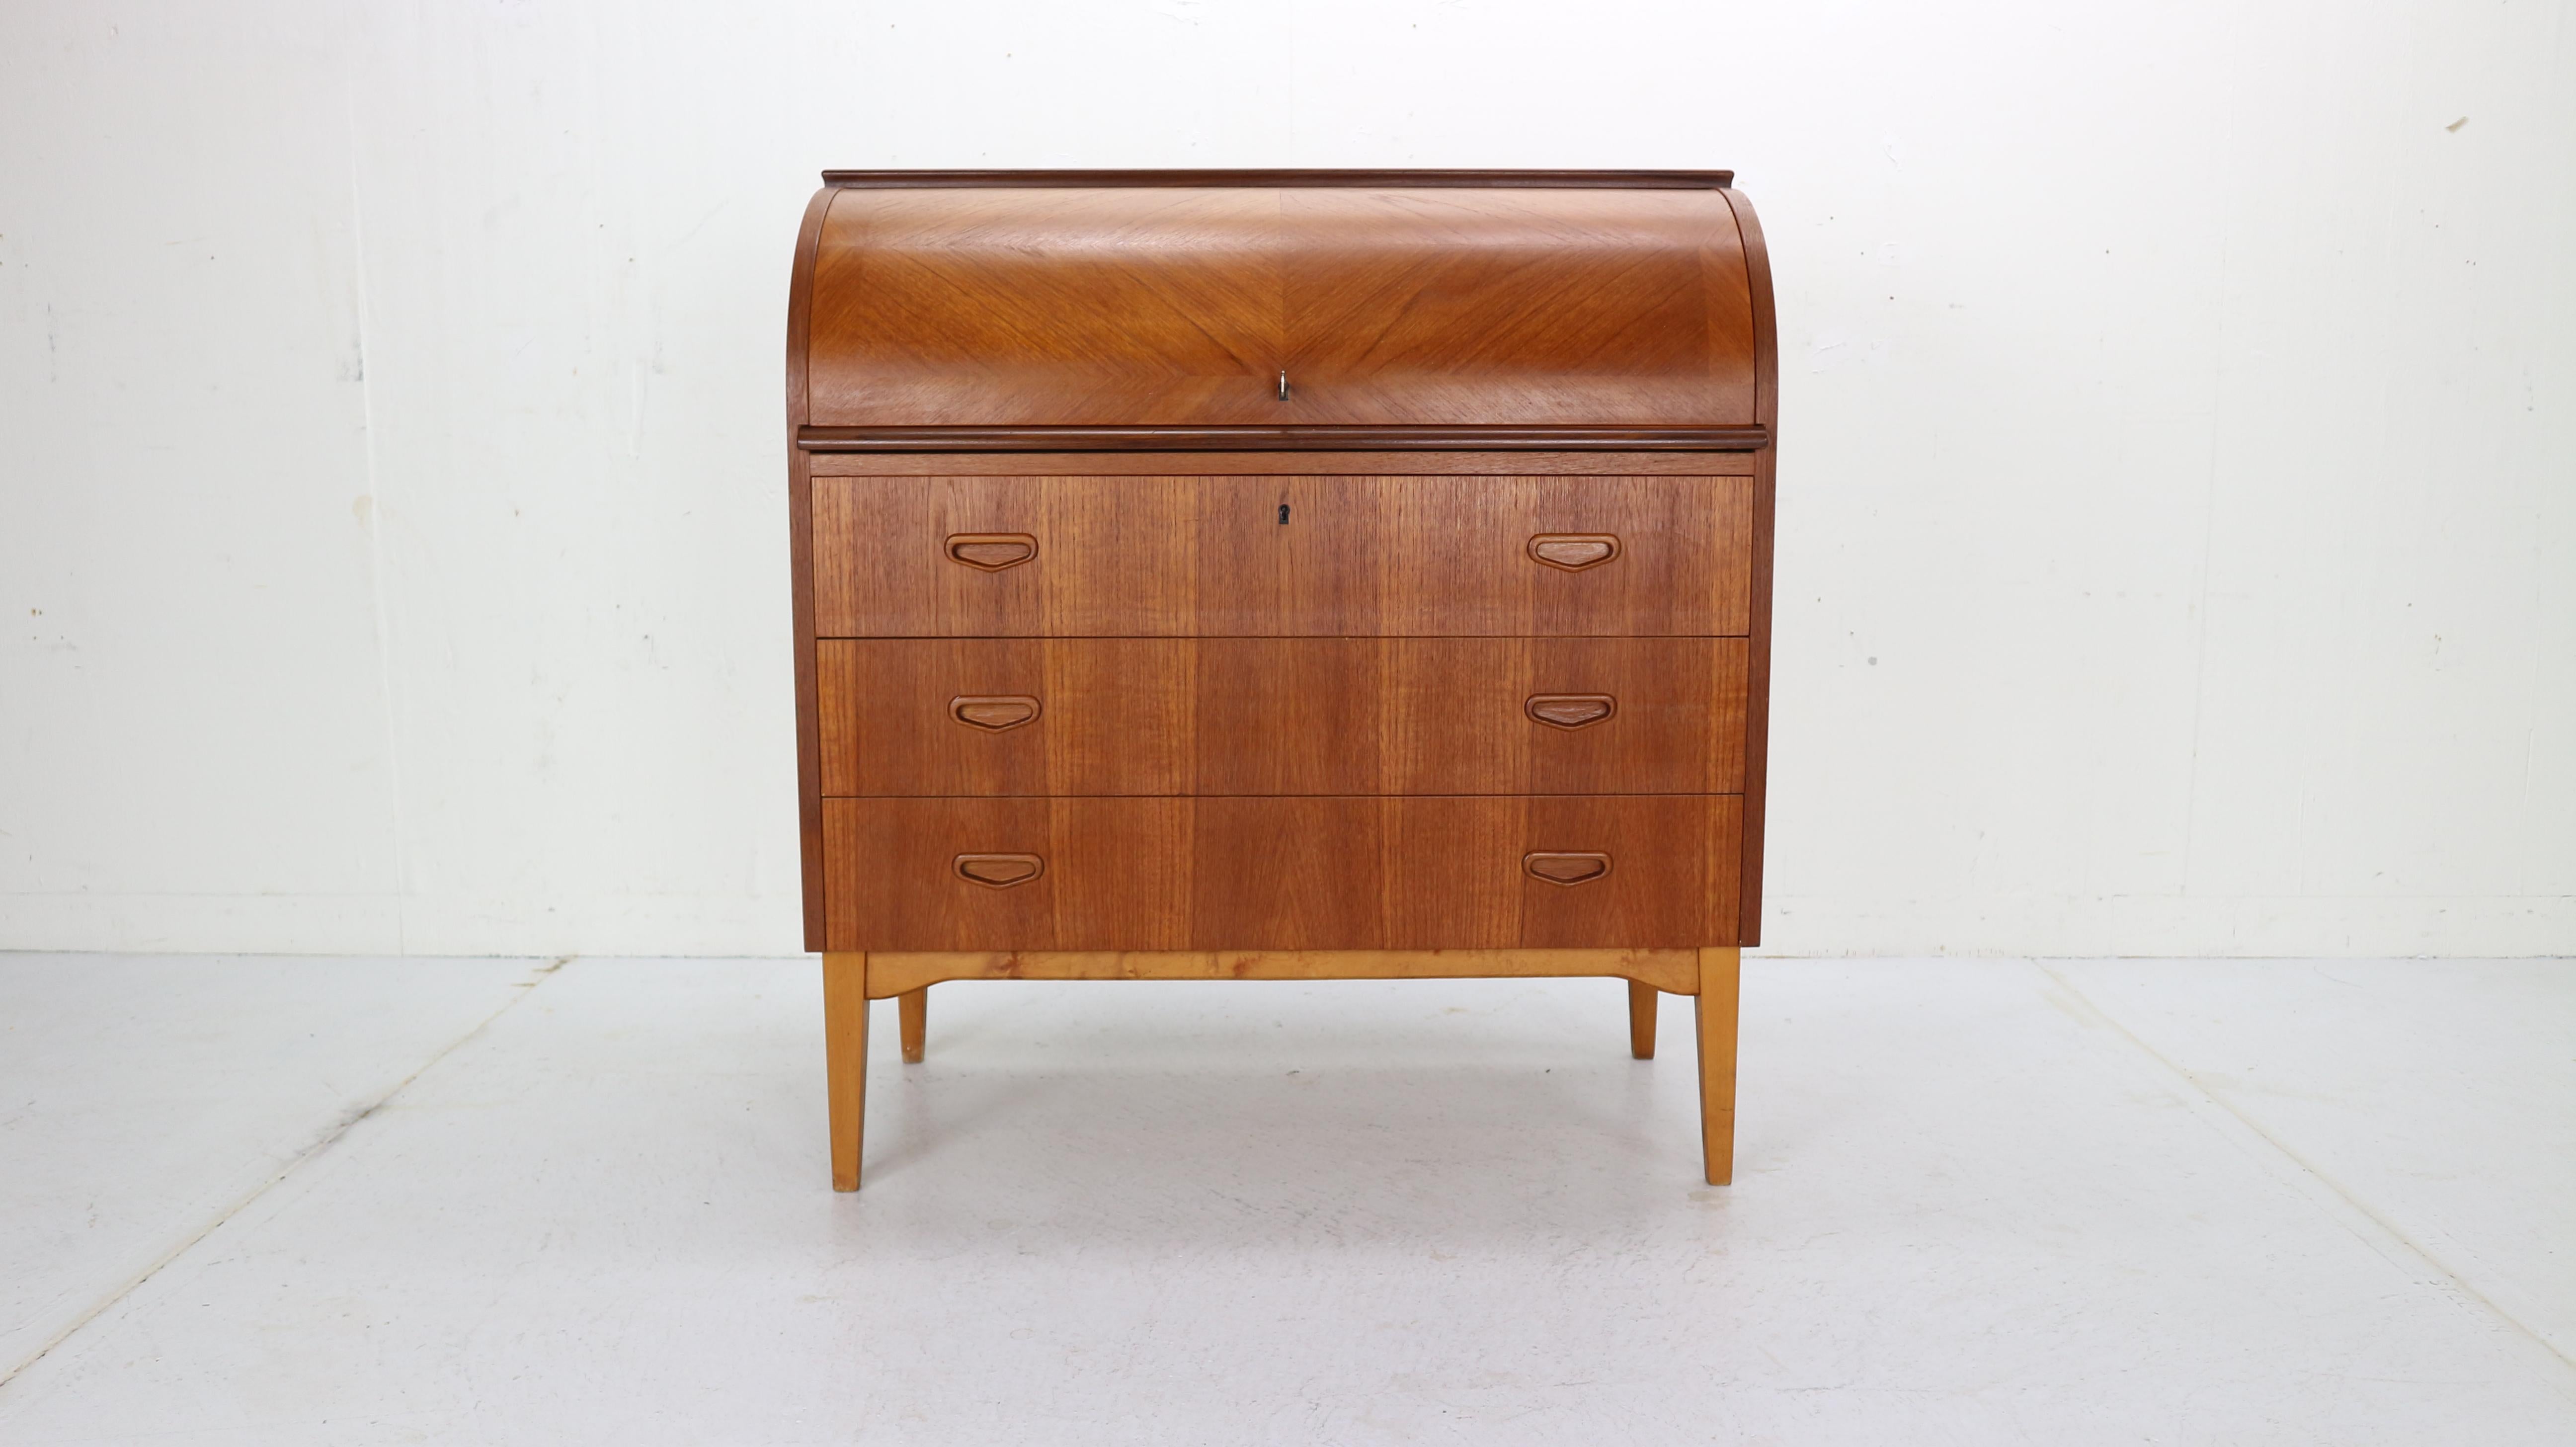 This iconic midcentury Swedish modern teak cylinder rolltop secretary- desk- cabinet is made in 1970s Sweeden by Egon Ostergaard designer and manufactured by Markaryds Mobelindustri manufacture.
The Classic Scandinavian Modern design has clean